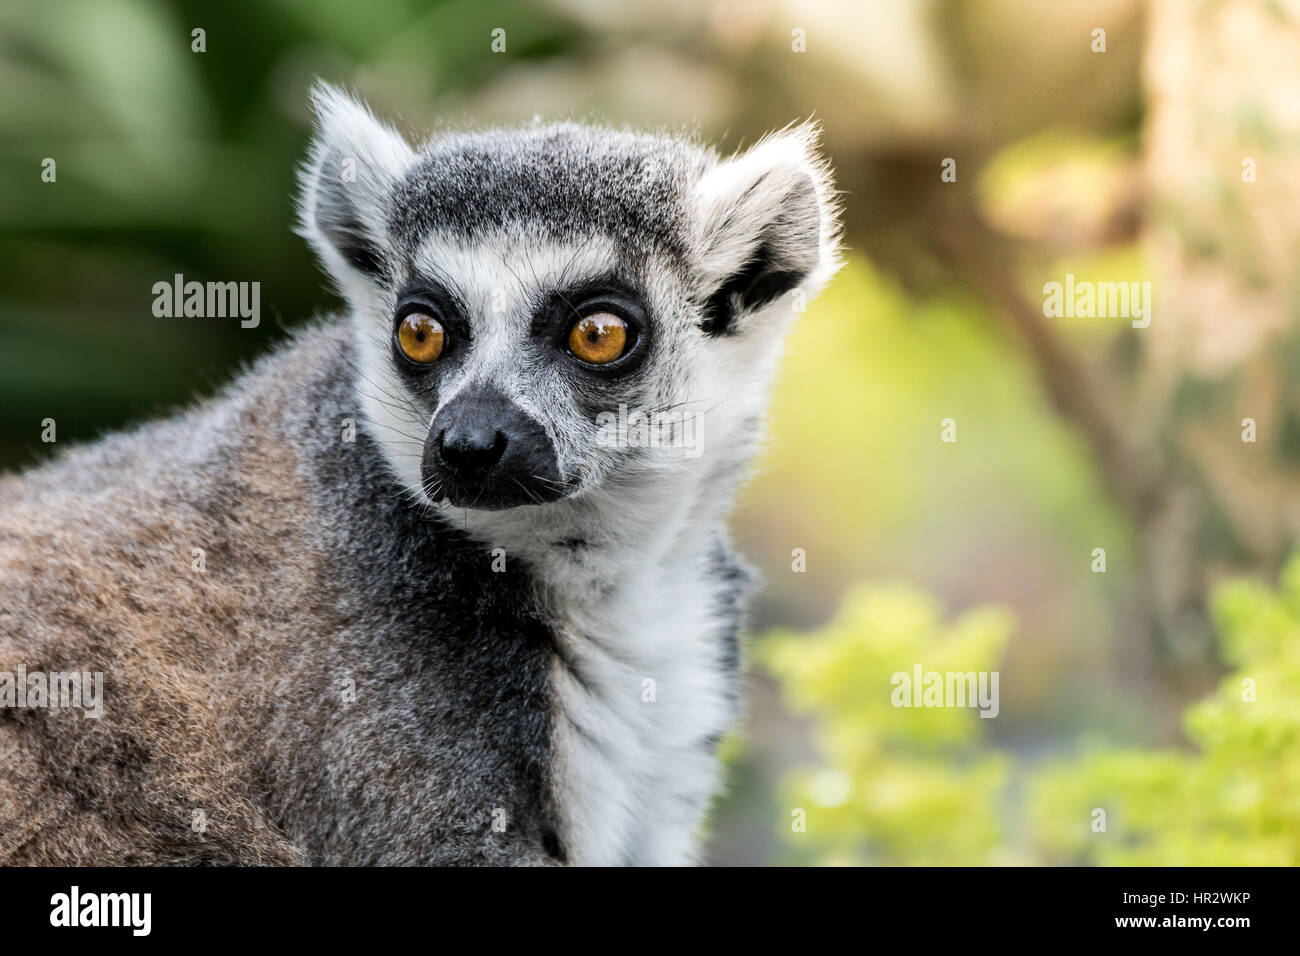 Close up image of head and shoulders of a lemur on the left side of image, with copy space on the right. Stock Photo